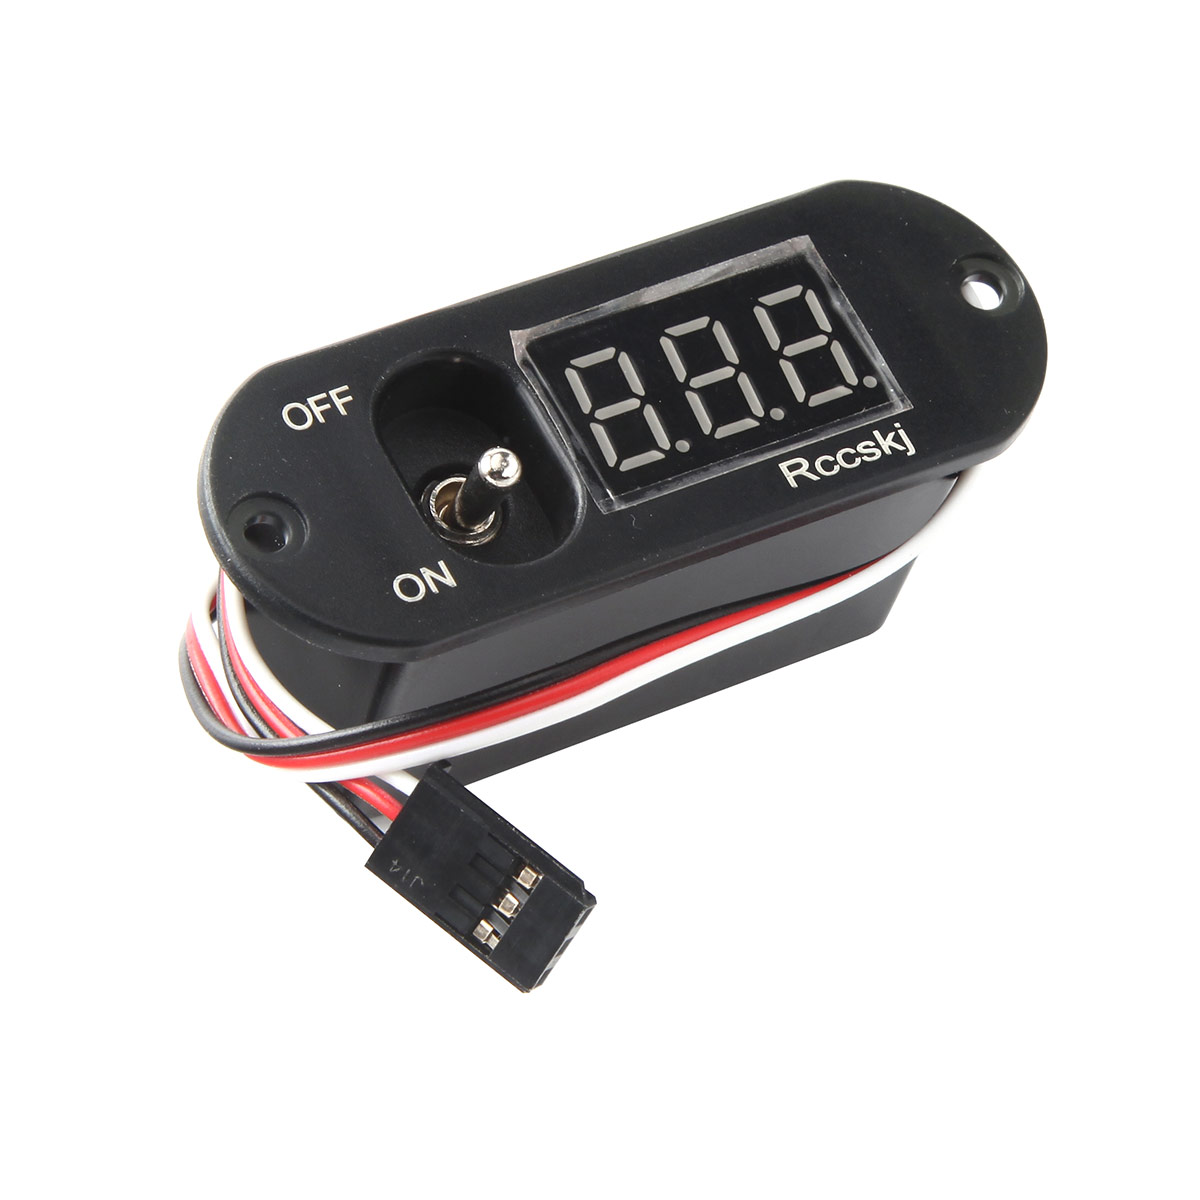 1 Pc Rccskj 2110 Current Switch Voltmeter Power Switch For RC Model